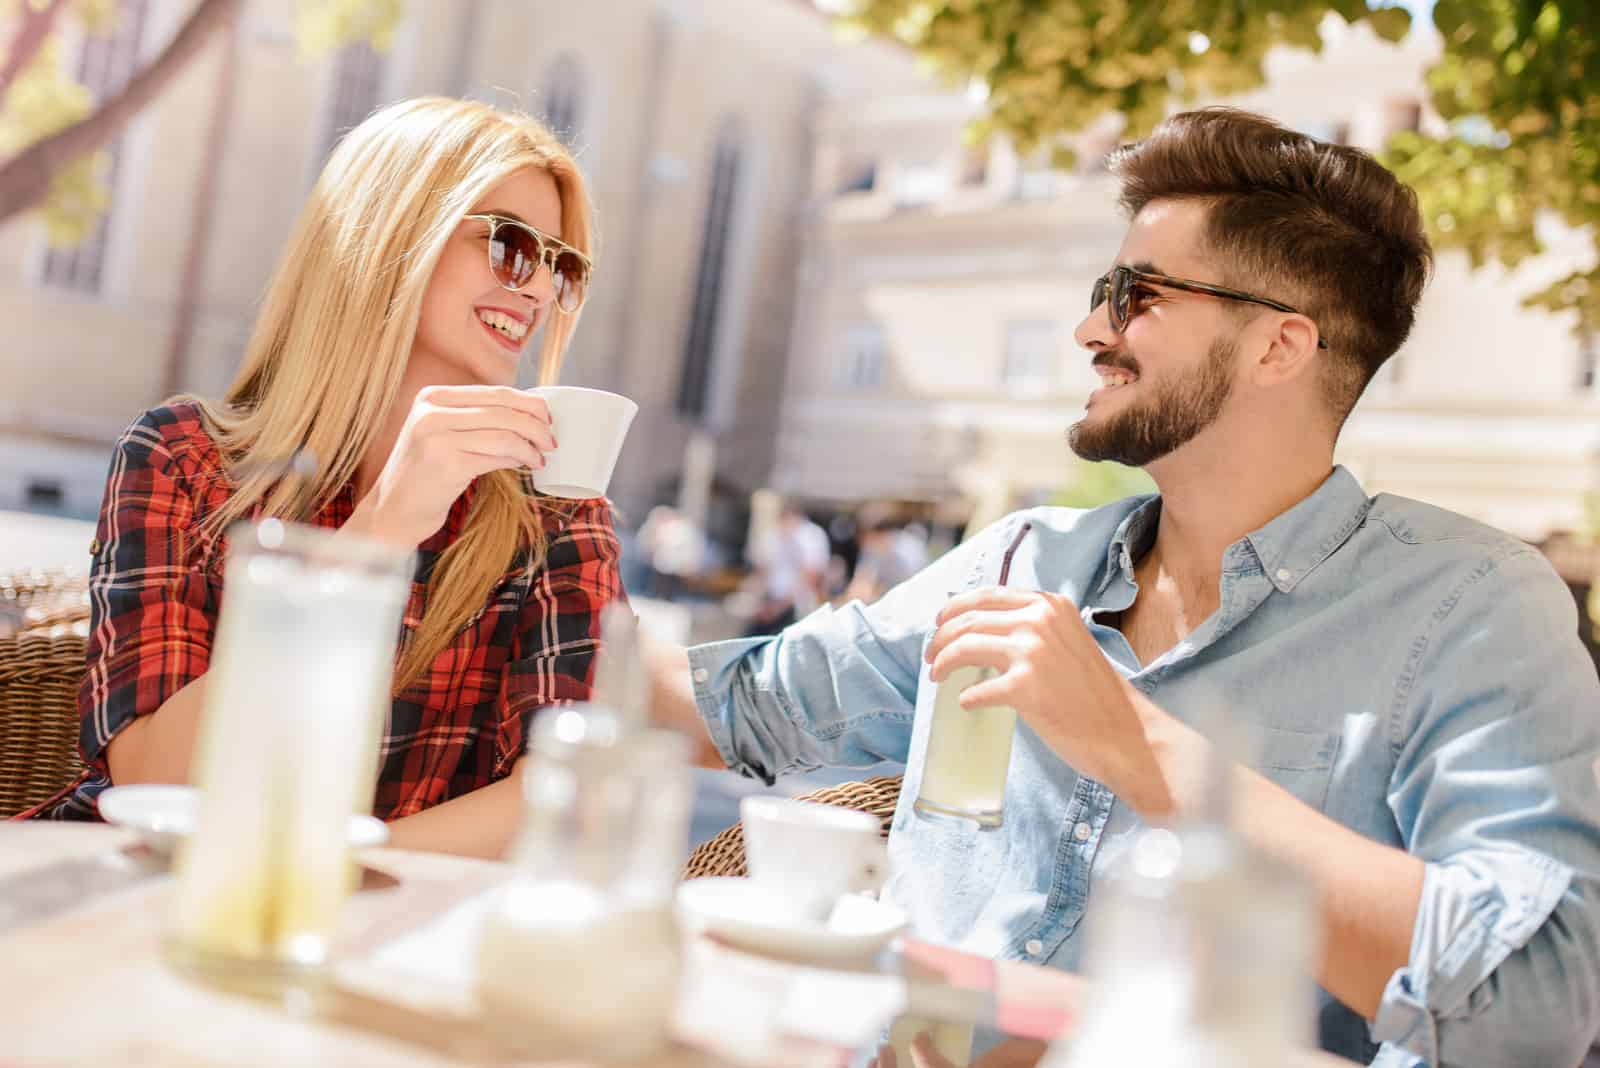 a smiling woman with long blonde hair talking to a man outdoors